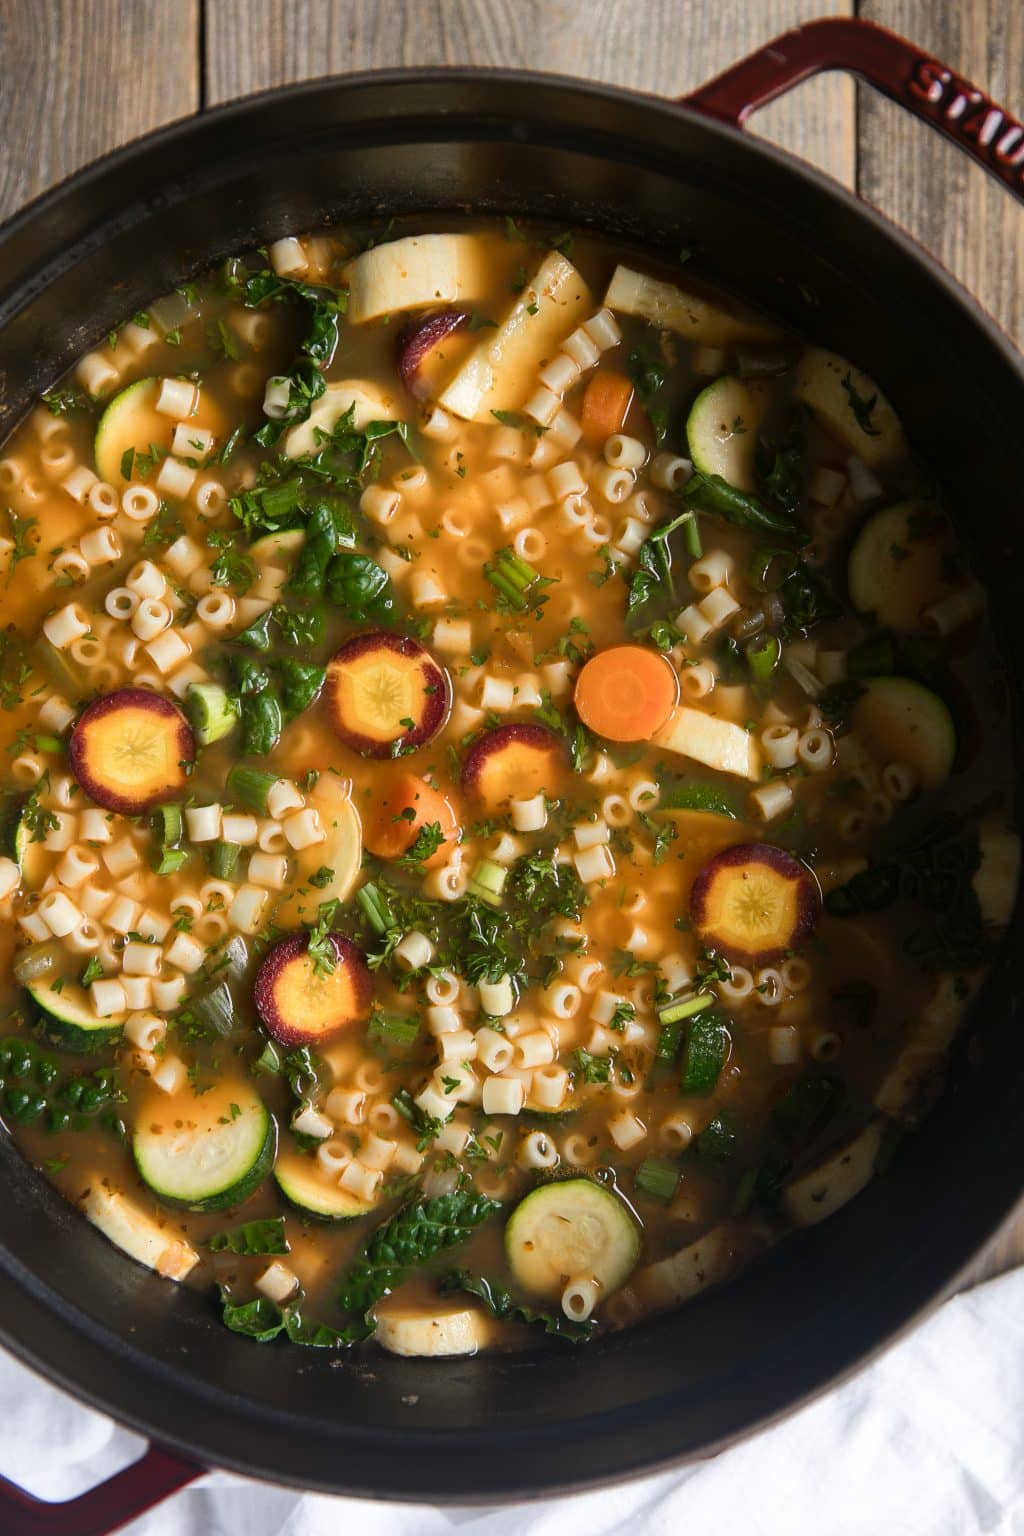 Large cast iron pot filled with carrots, kale, pasta, zucchini, squash in a tomato broth.